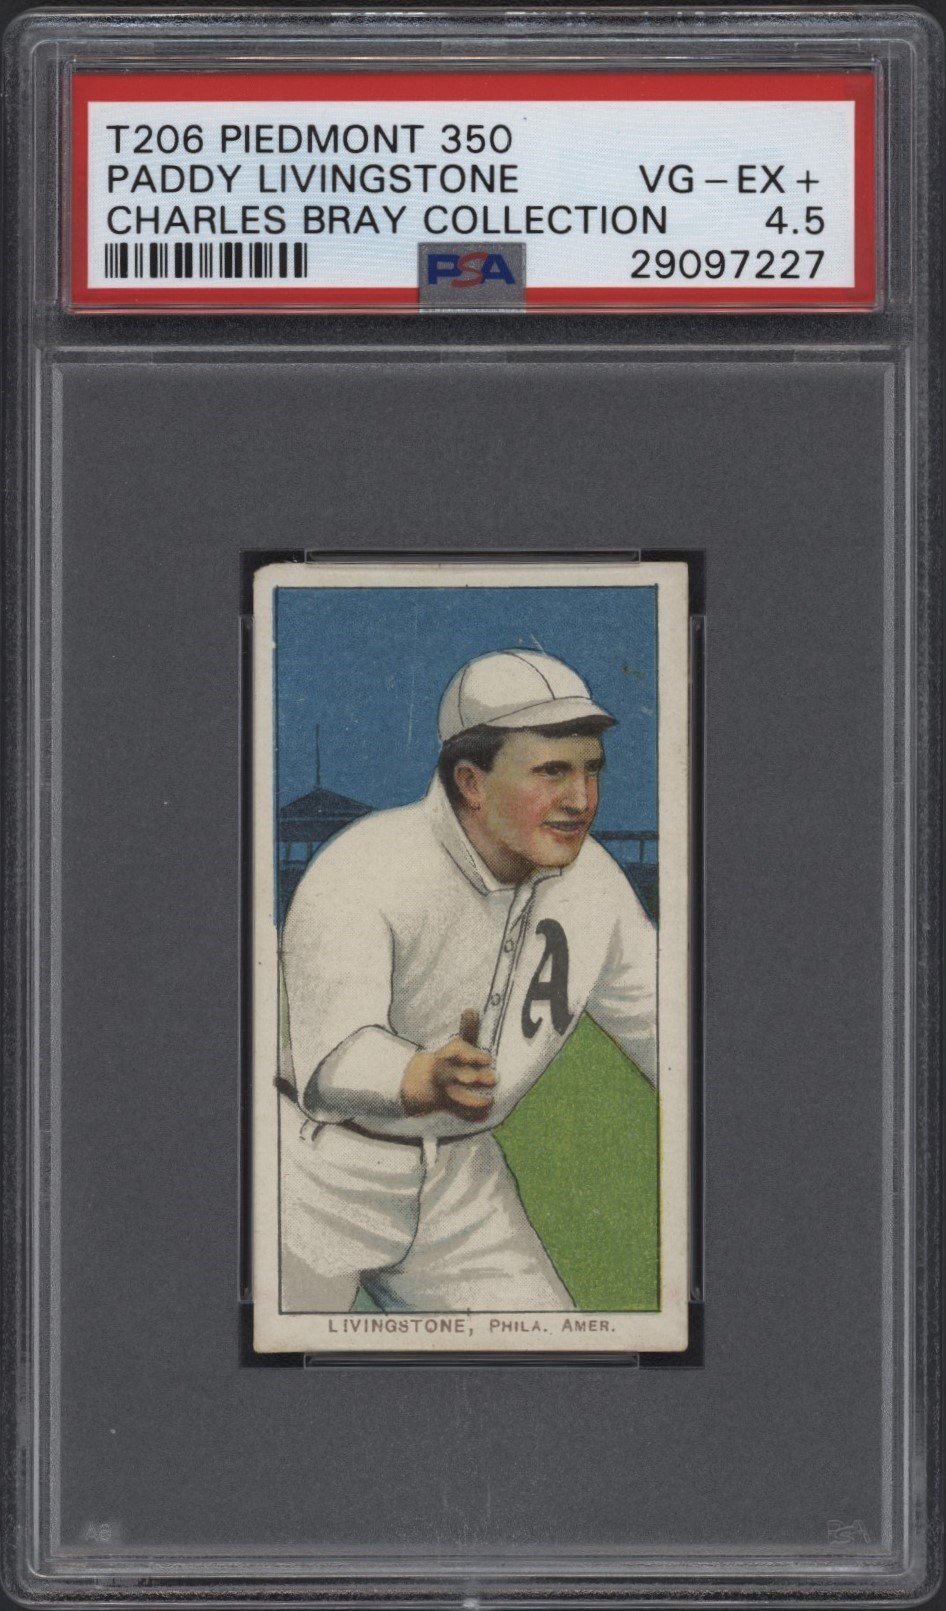 Baseball and Trading Cards - T206 Piedmont 350 Paddy Livingstone PSA 4.5 From the Charles Bray Collection